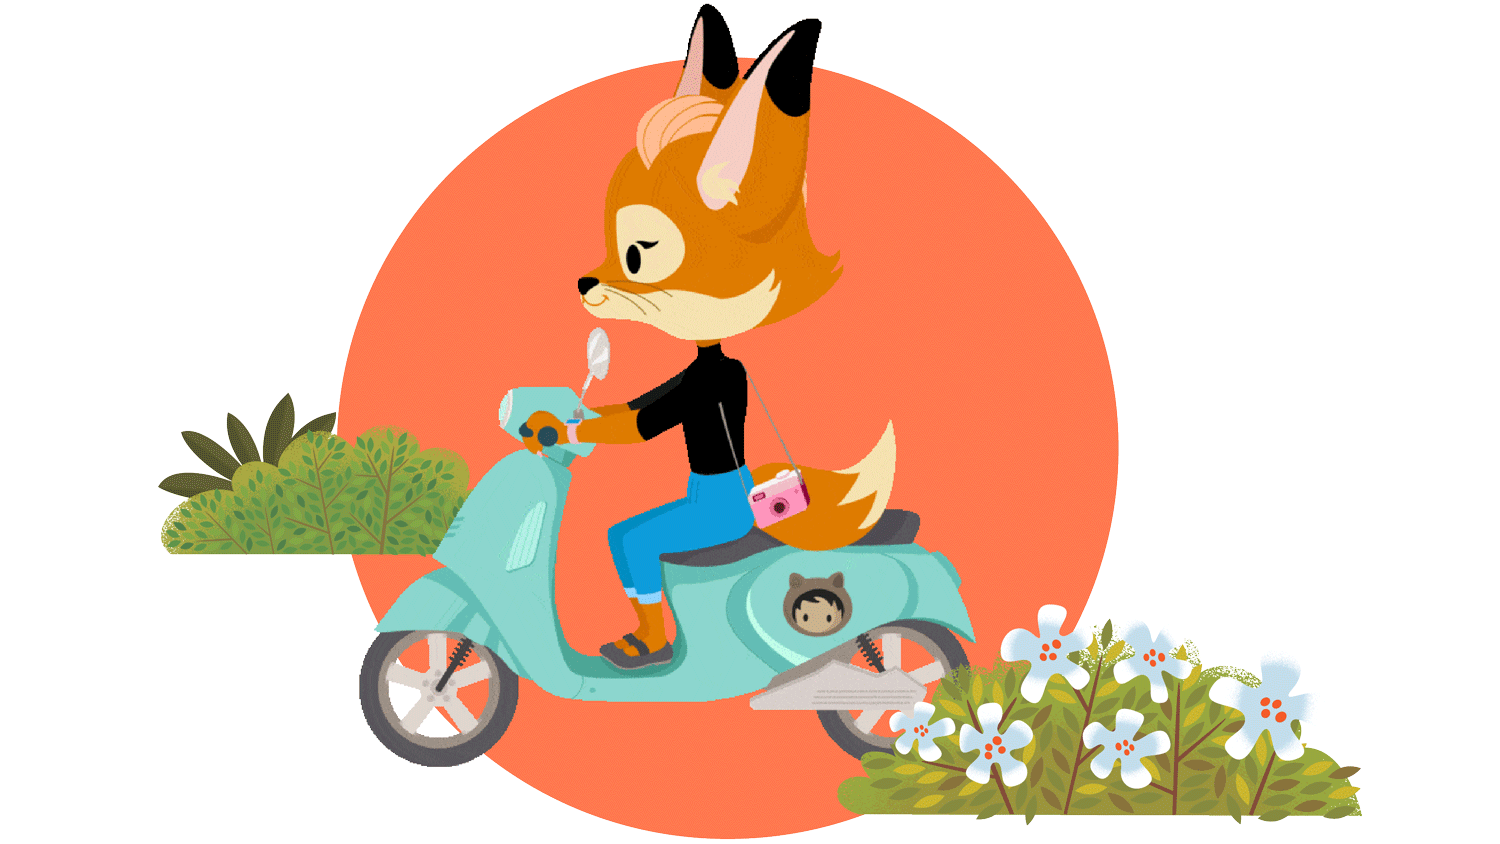 Brandy, a fox, the marketer riding on a scooter with an orange circle behind her.